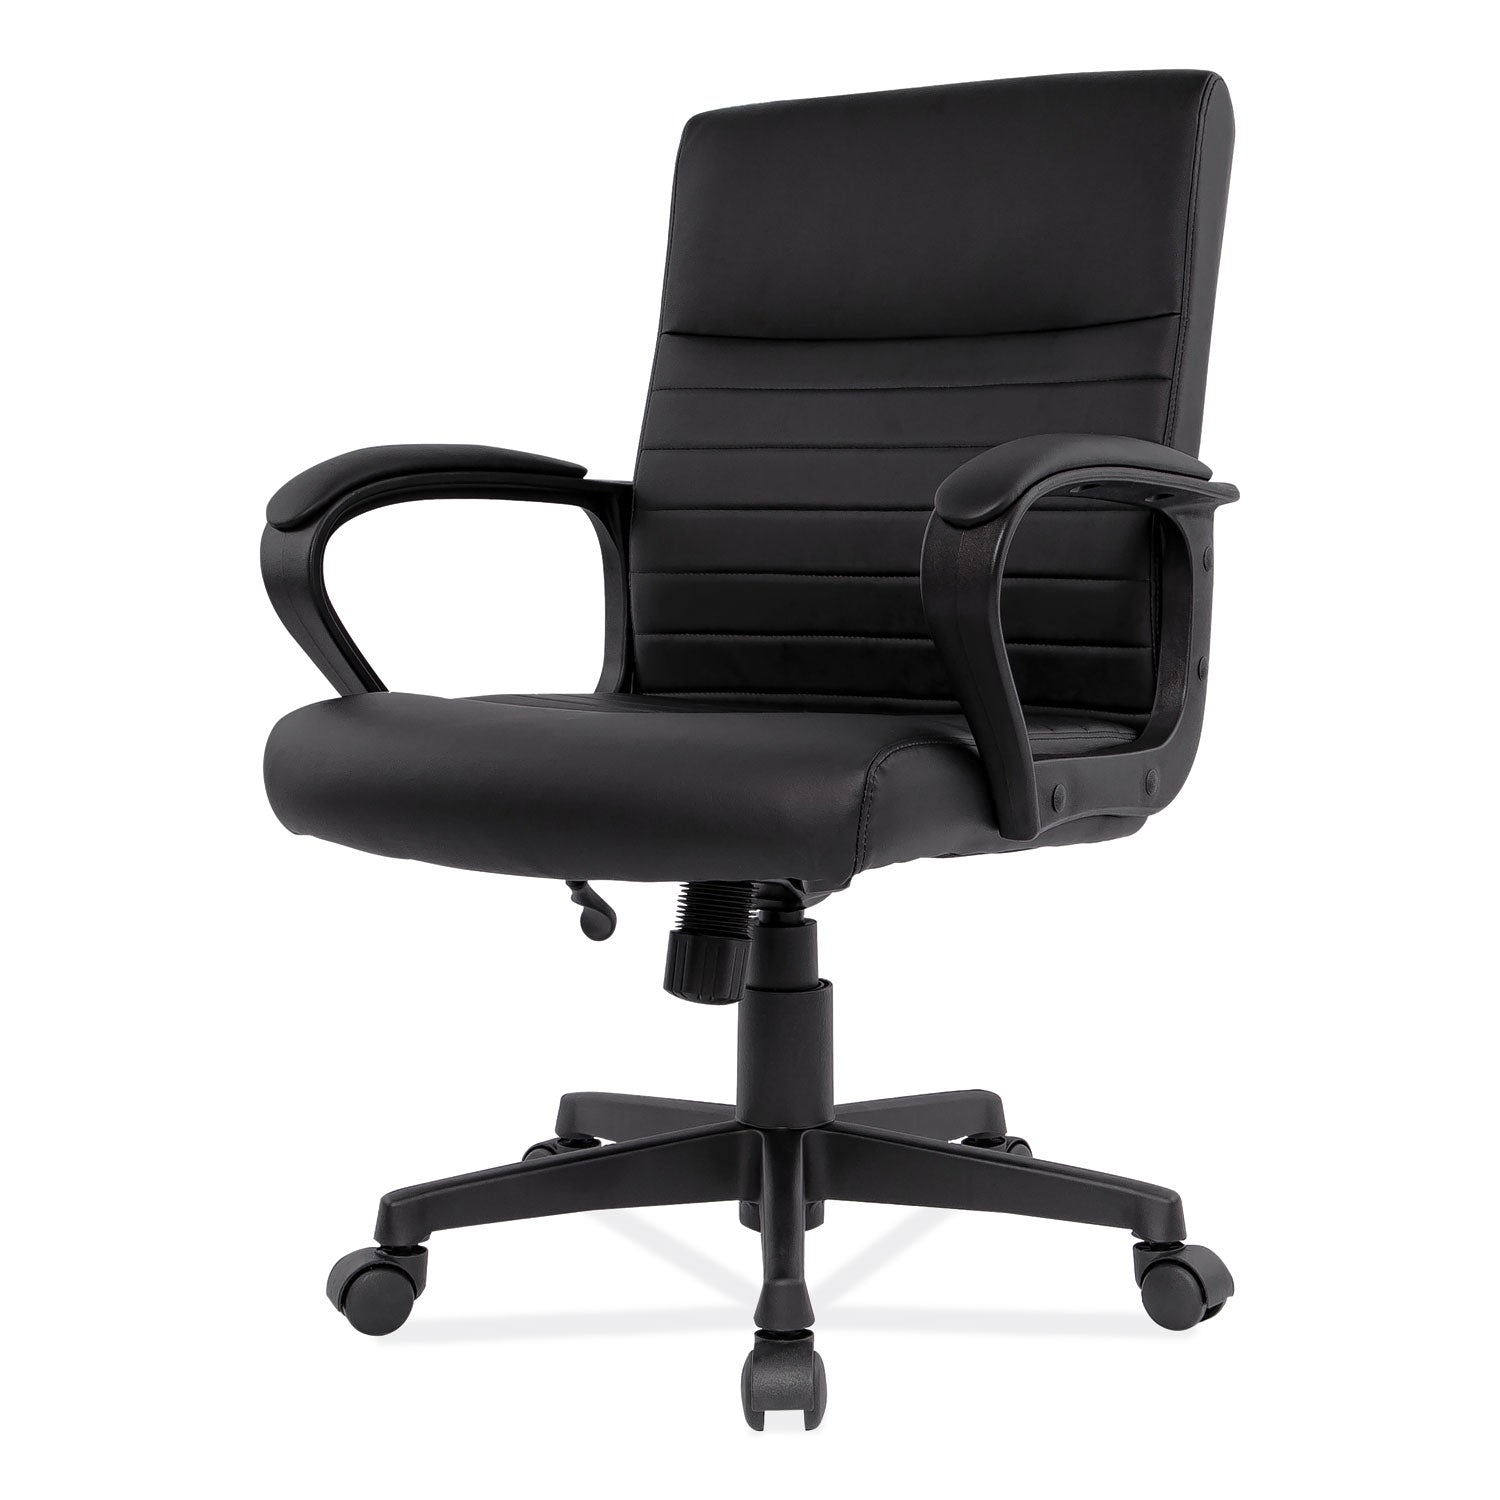 Alera Breich Series Manager Chair, Supports Up to 275 lbs, 16.73" to 20.39" Seat Height, Black Seat/Back, Black Base - 2